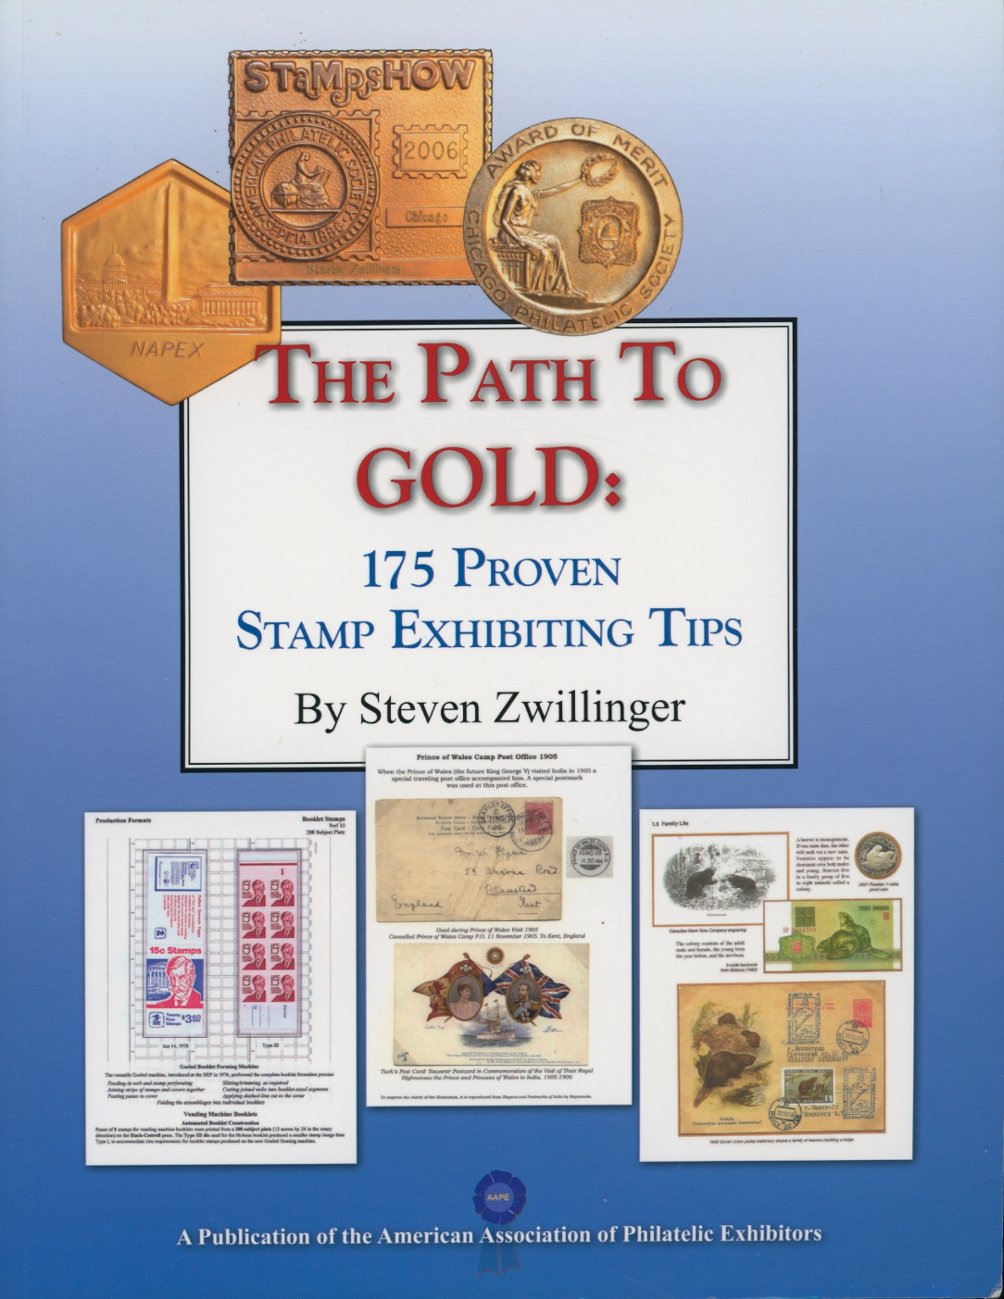 The Path To Gold: 175 Proven Stamp Exhibiting Tips, by Steve Zwillinger, 2016, color, paperback, 194 pages (2 lb 1 oz)